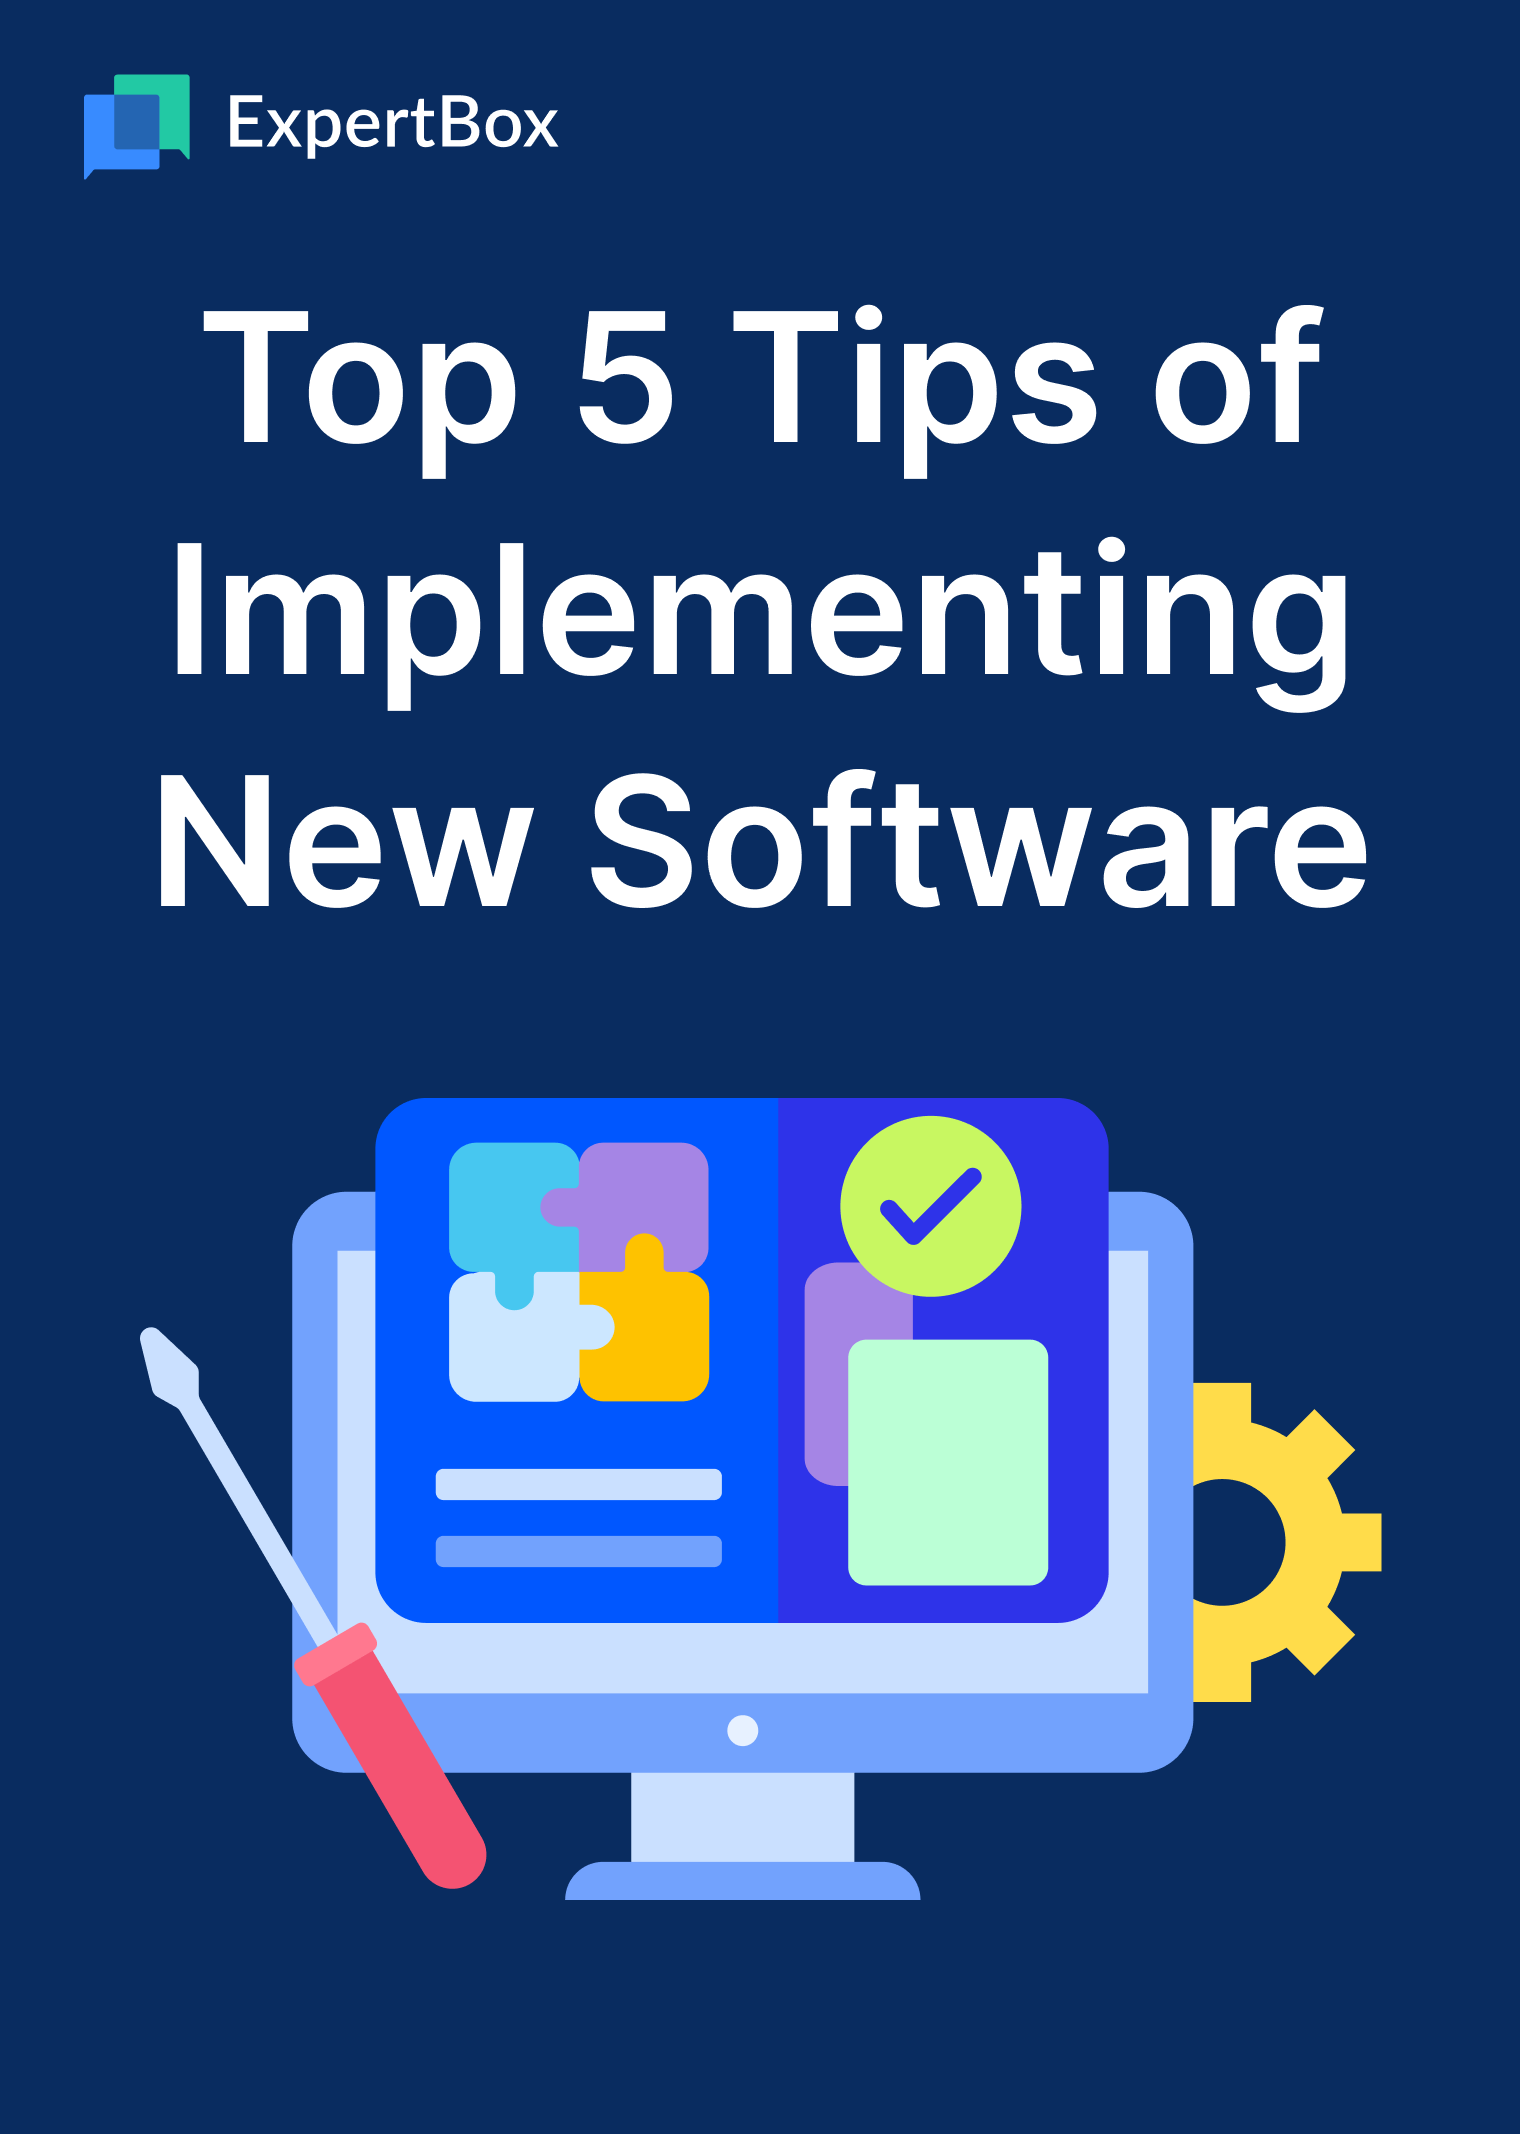 5 Tips to Implement New Software in Your Team